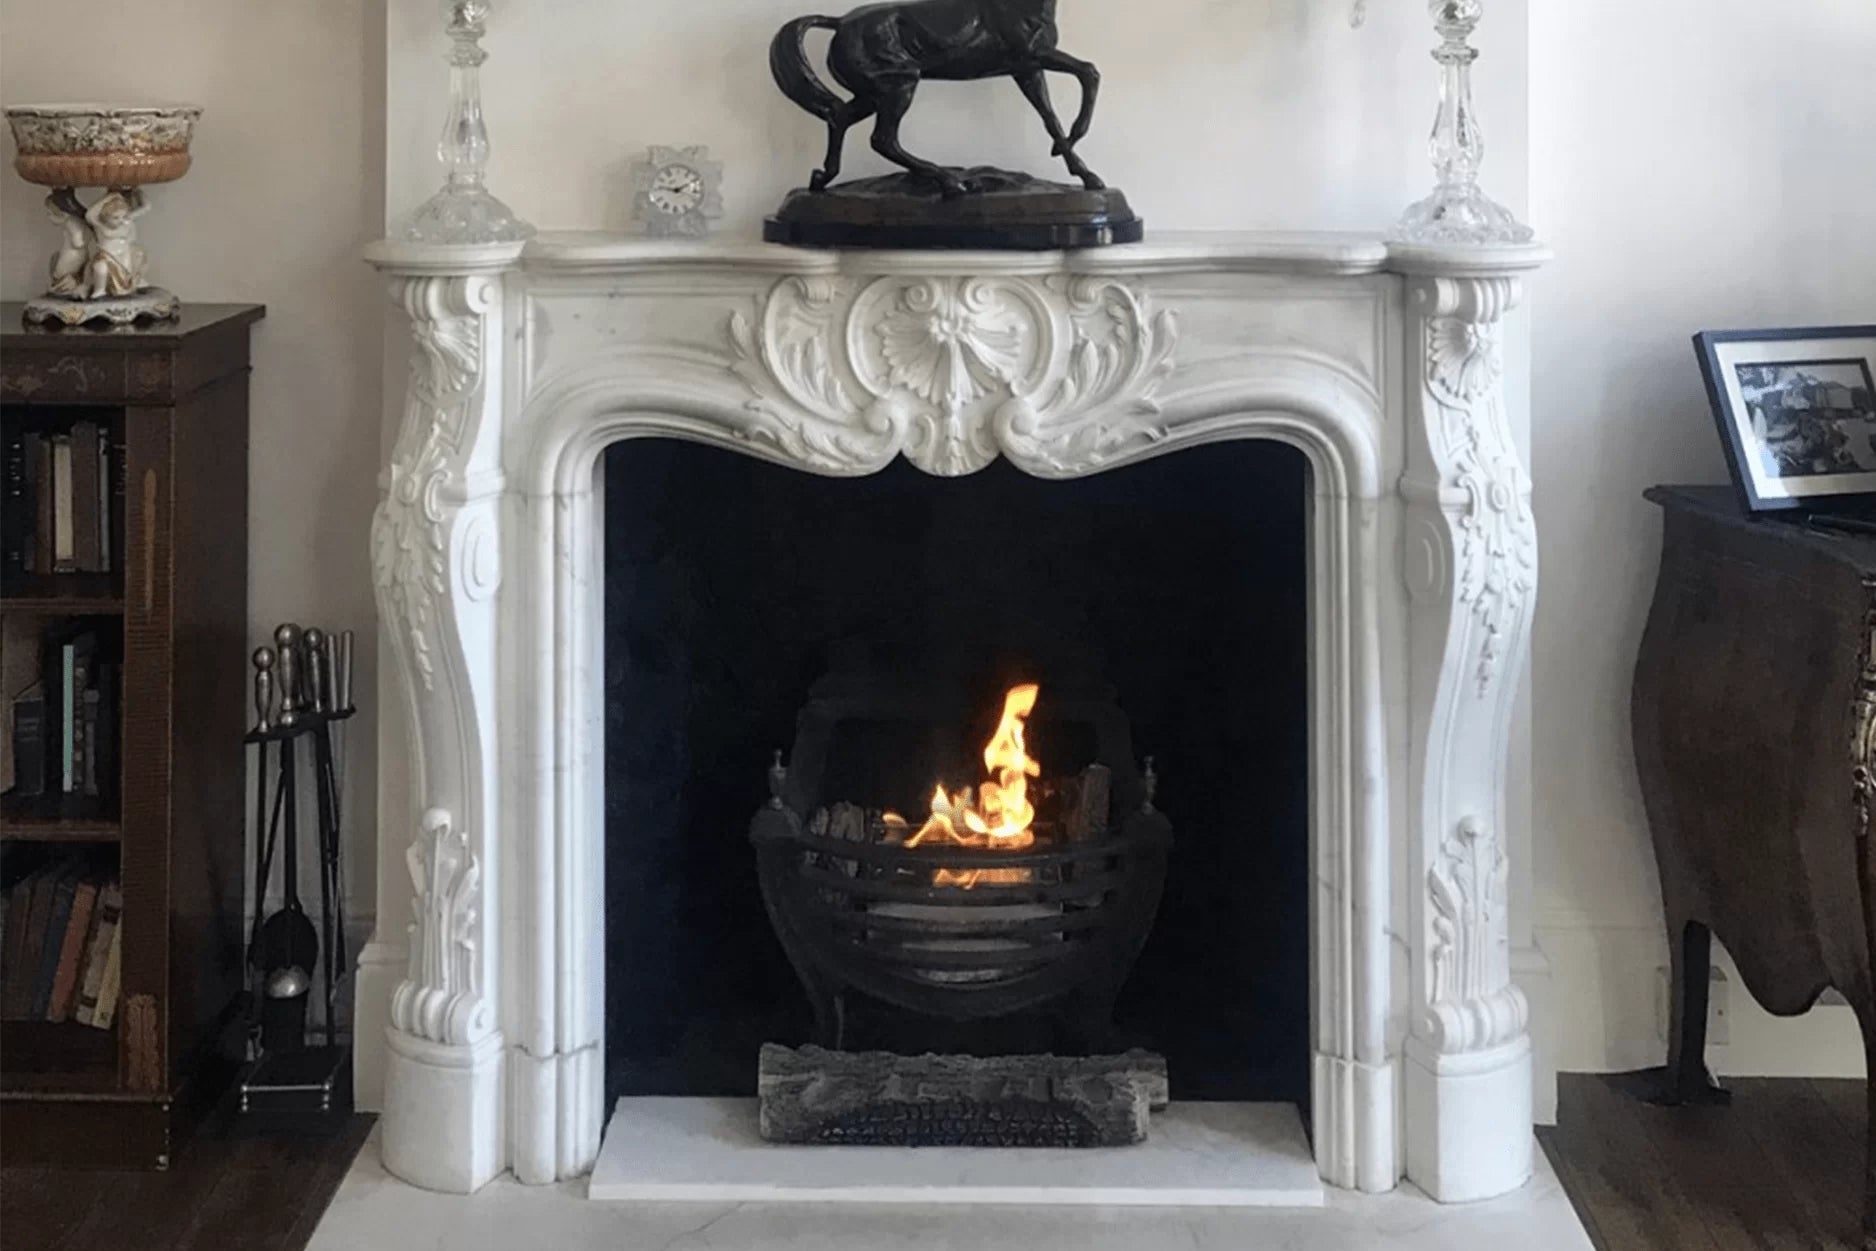 Small Burner in old grate and white stone fireplace